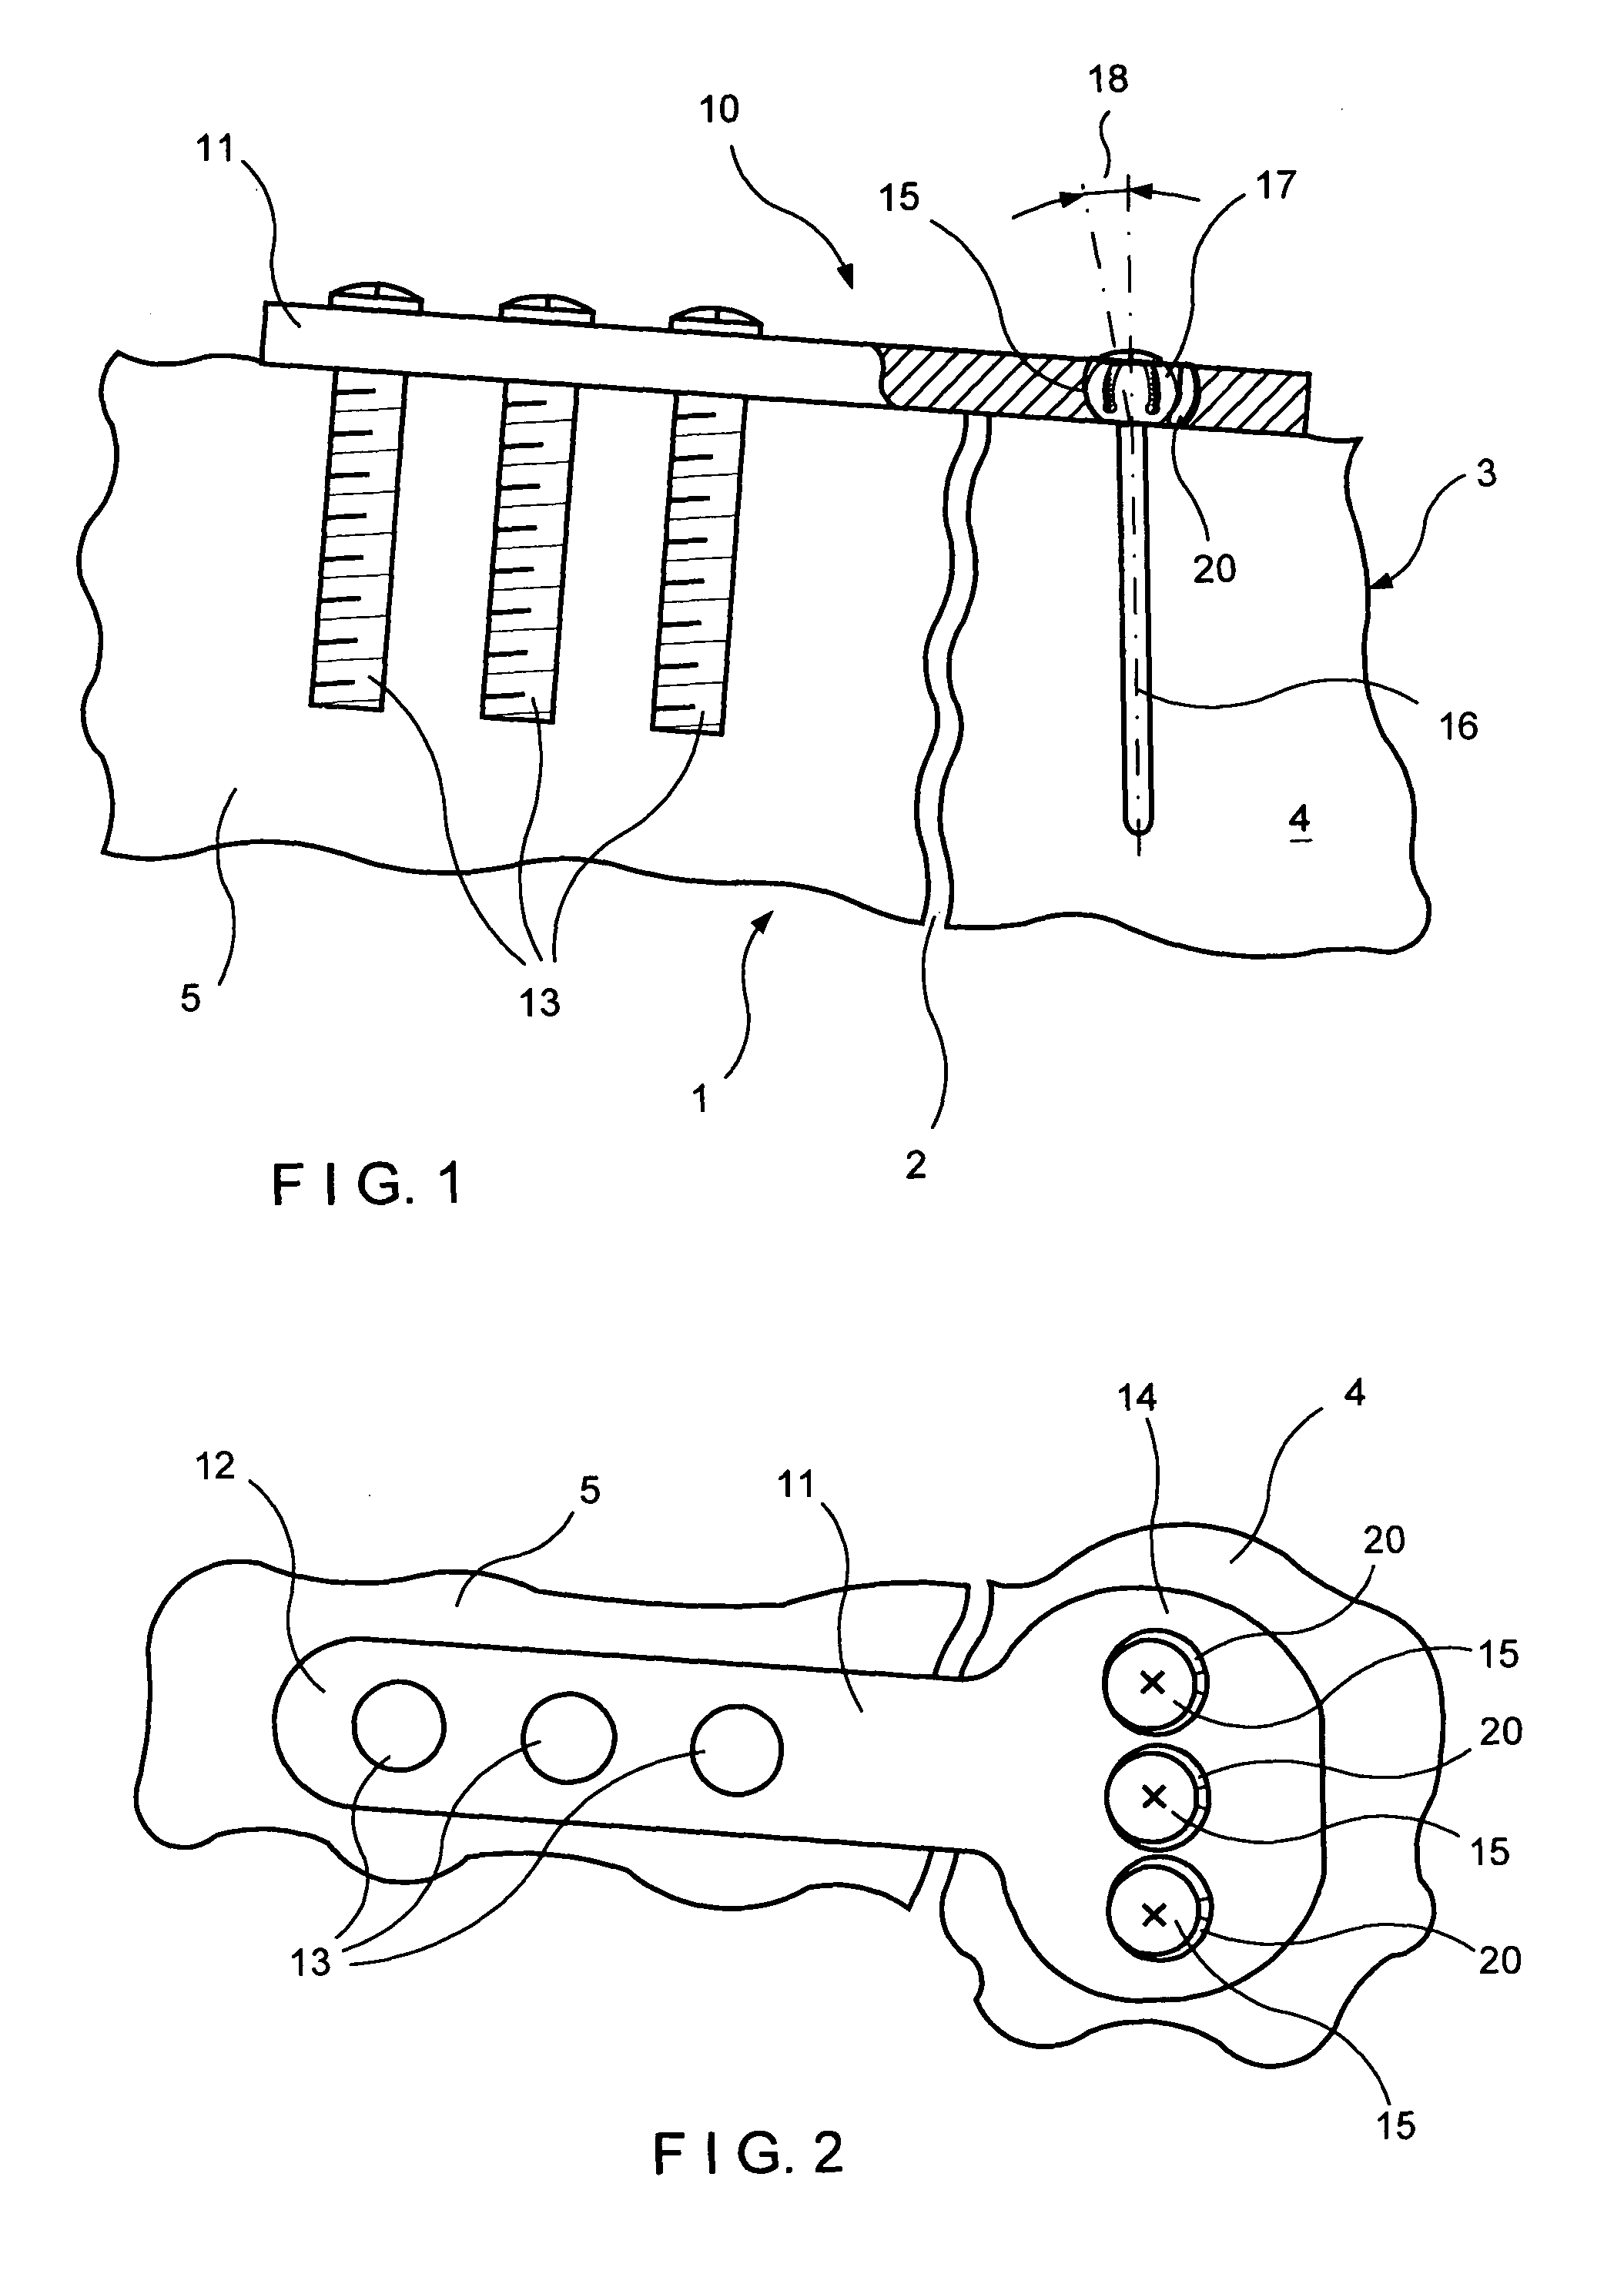 Bearing plate for use in fracture fixation having a spherical bearing hole with yielding expandability